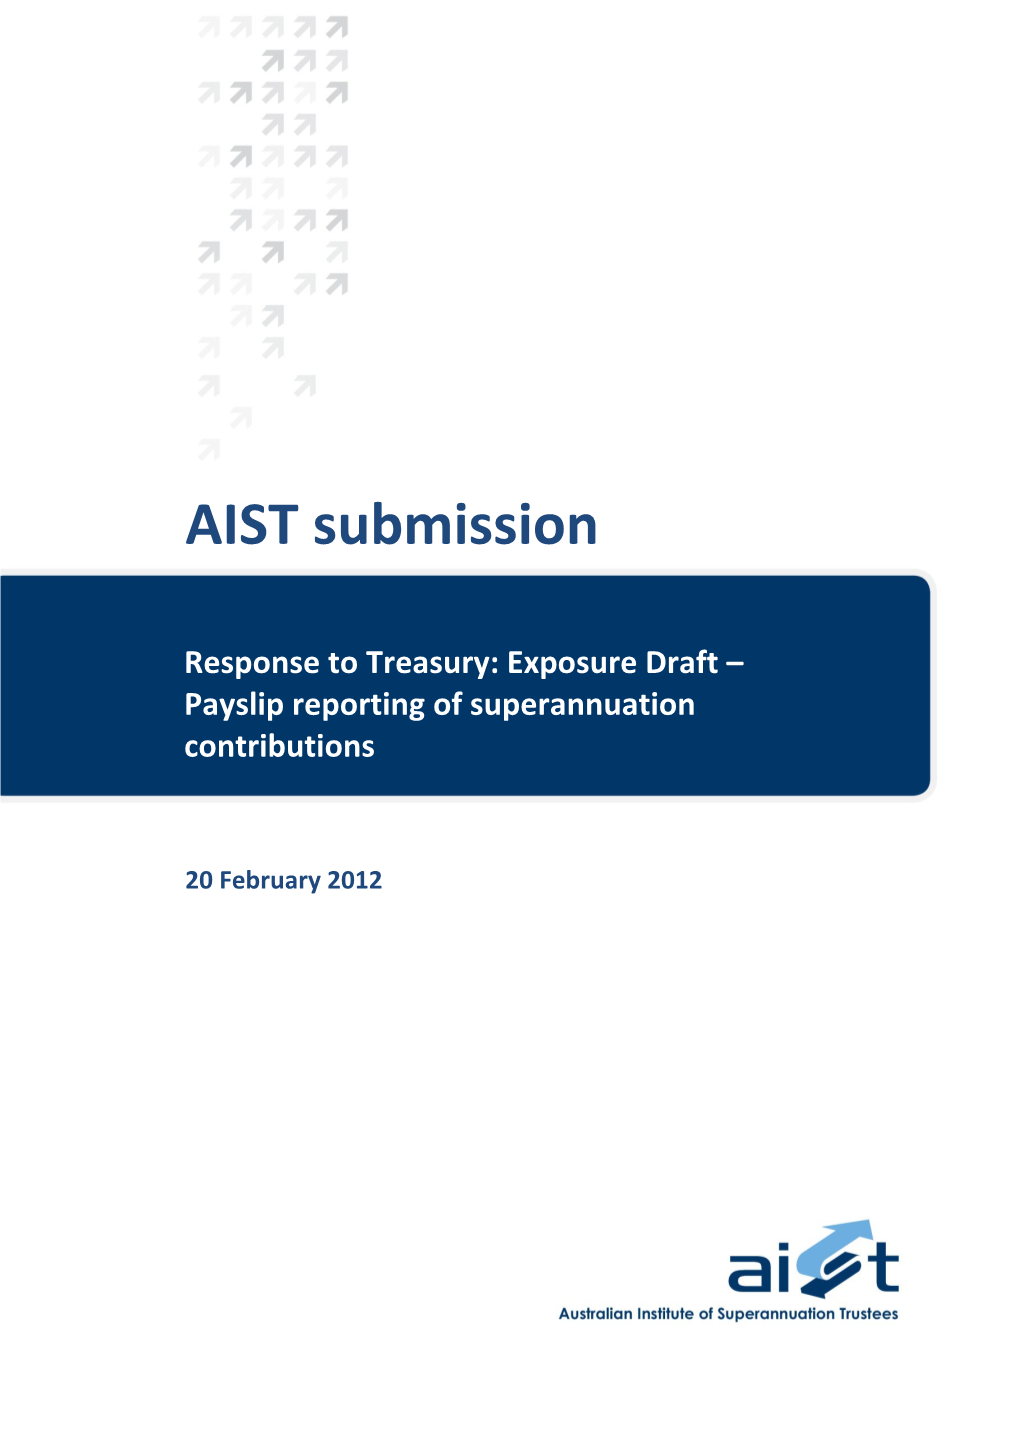 Submission: Exposure Draft - Payslip Reporting of Superannuation Contributions